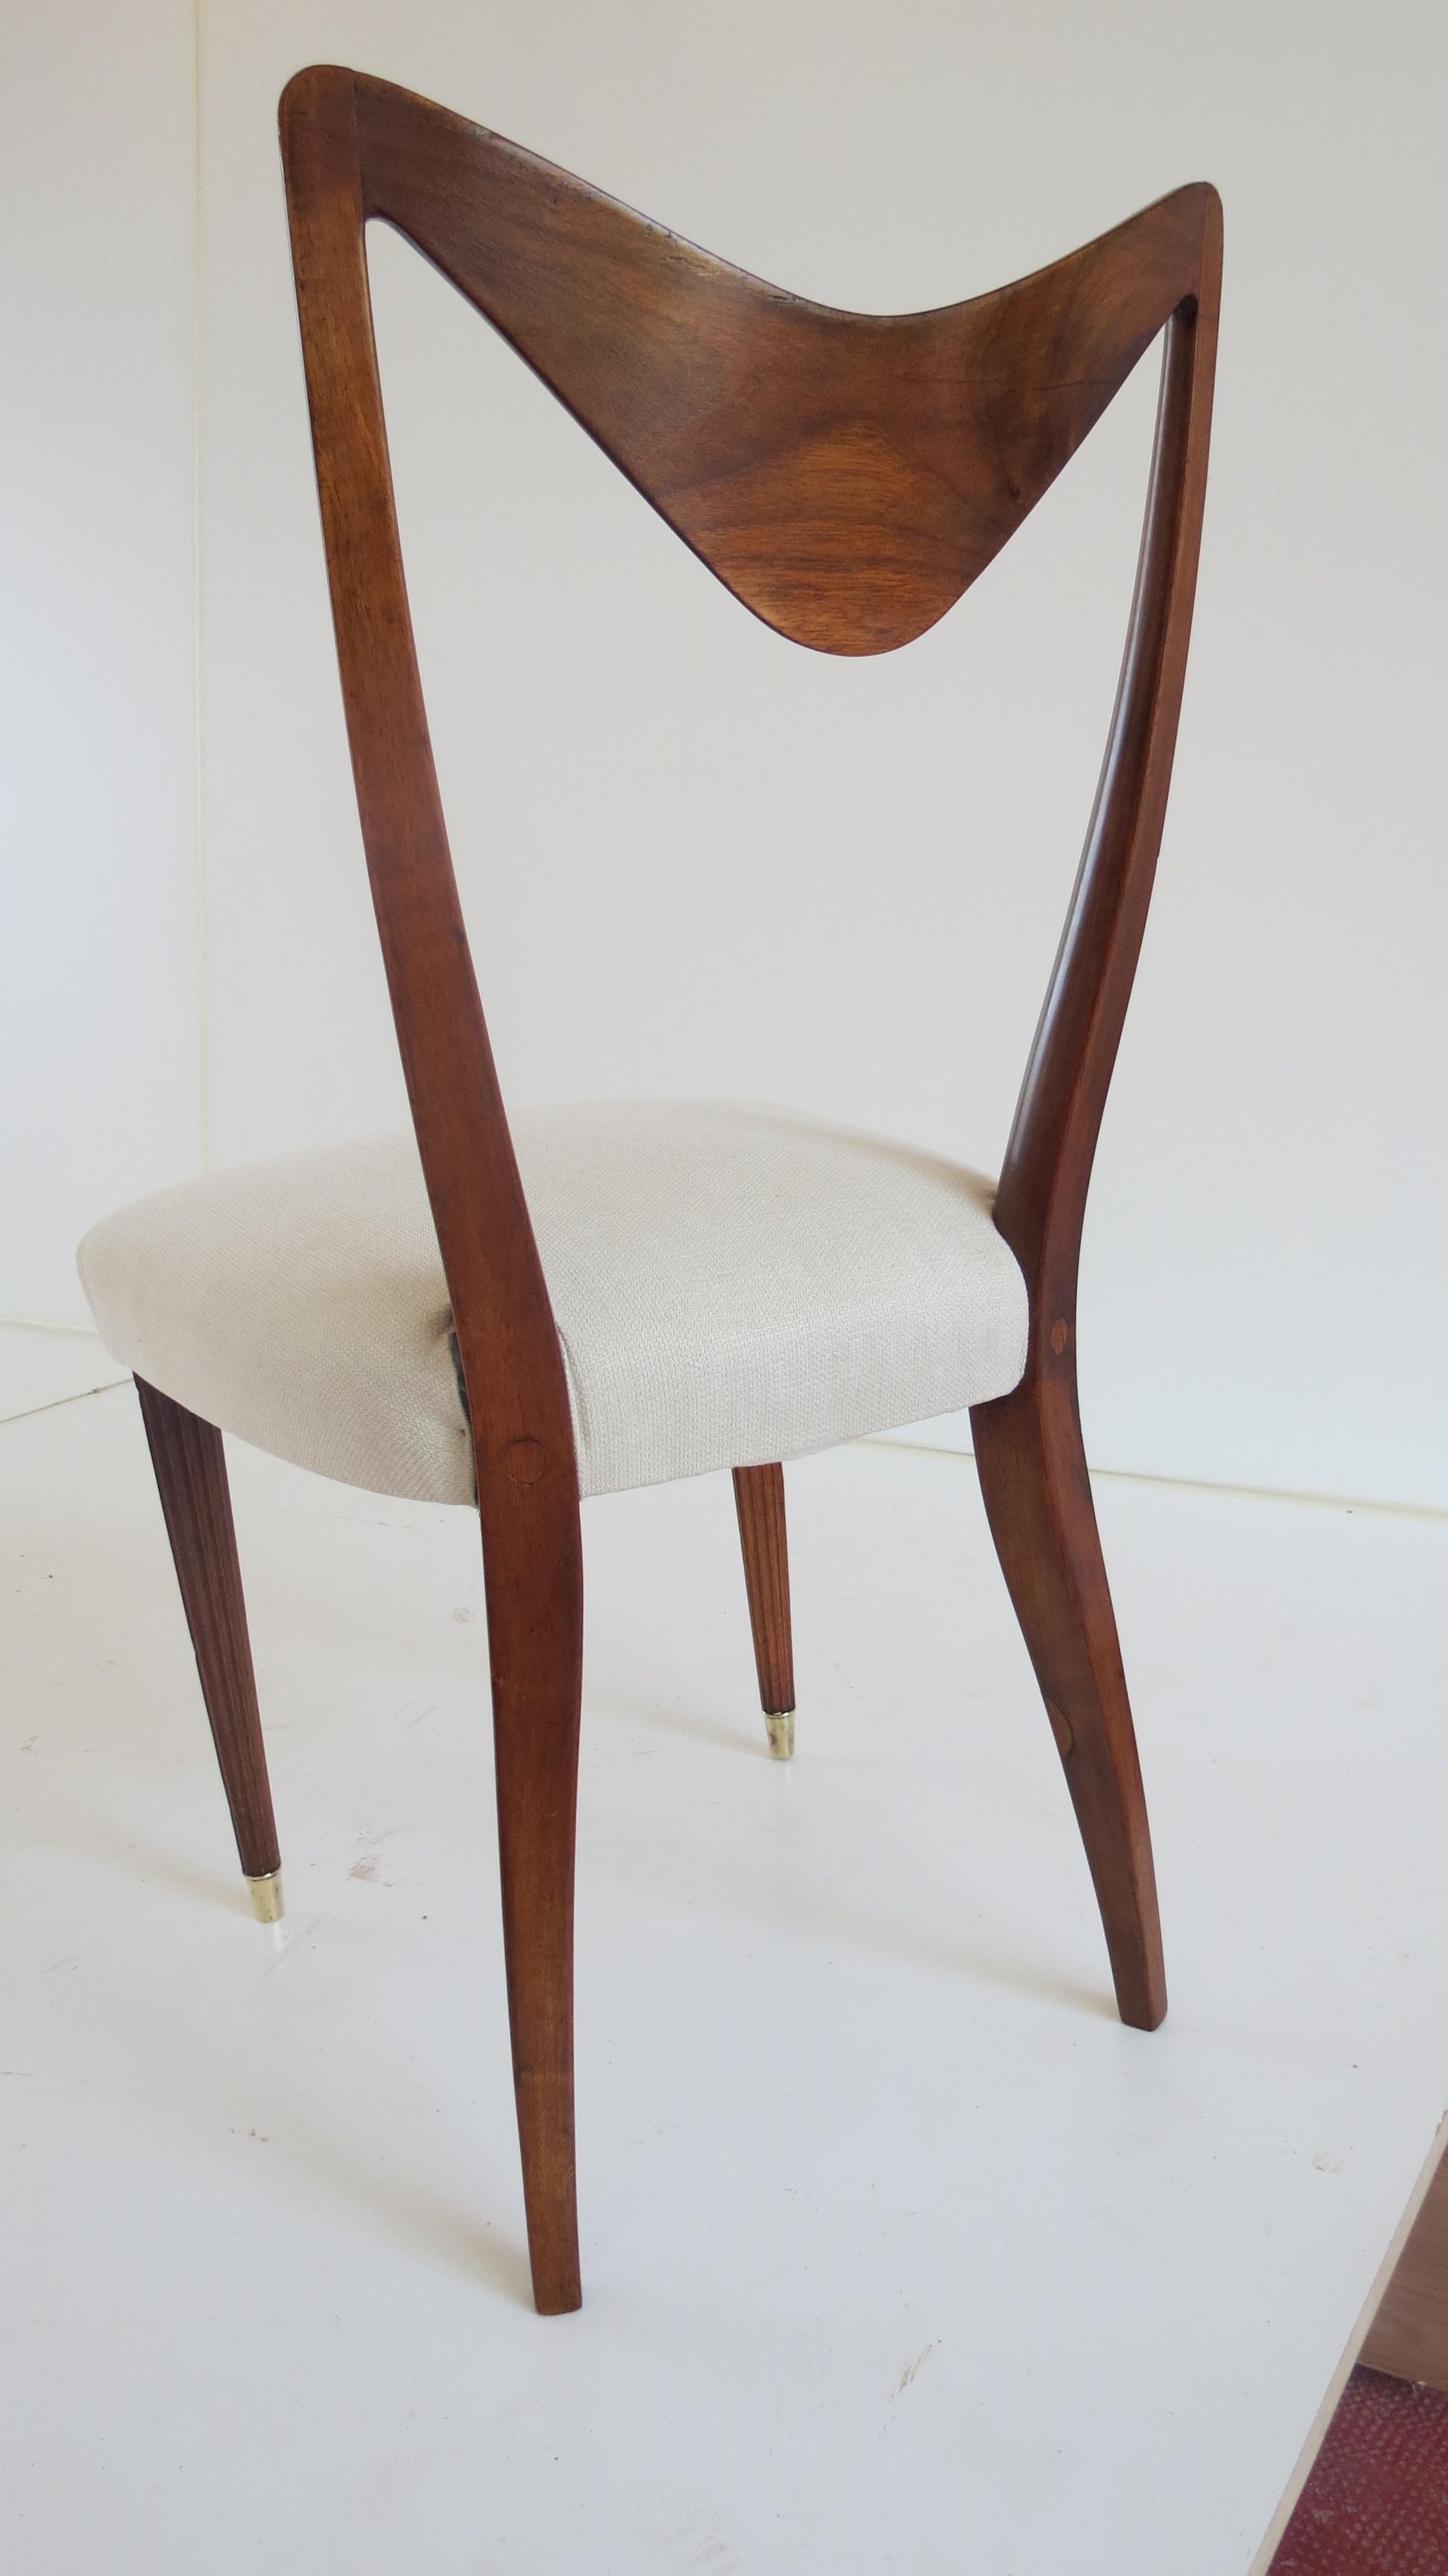 Set of Seven Walnut Dining Room Chairs by Arch, Carlo Enrico Rava, Milano, 1940 1